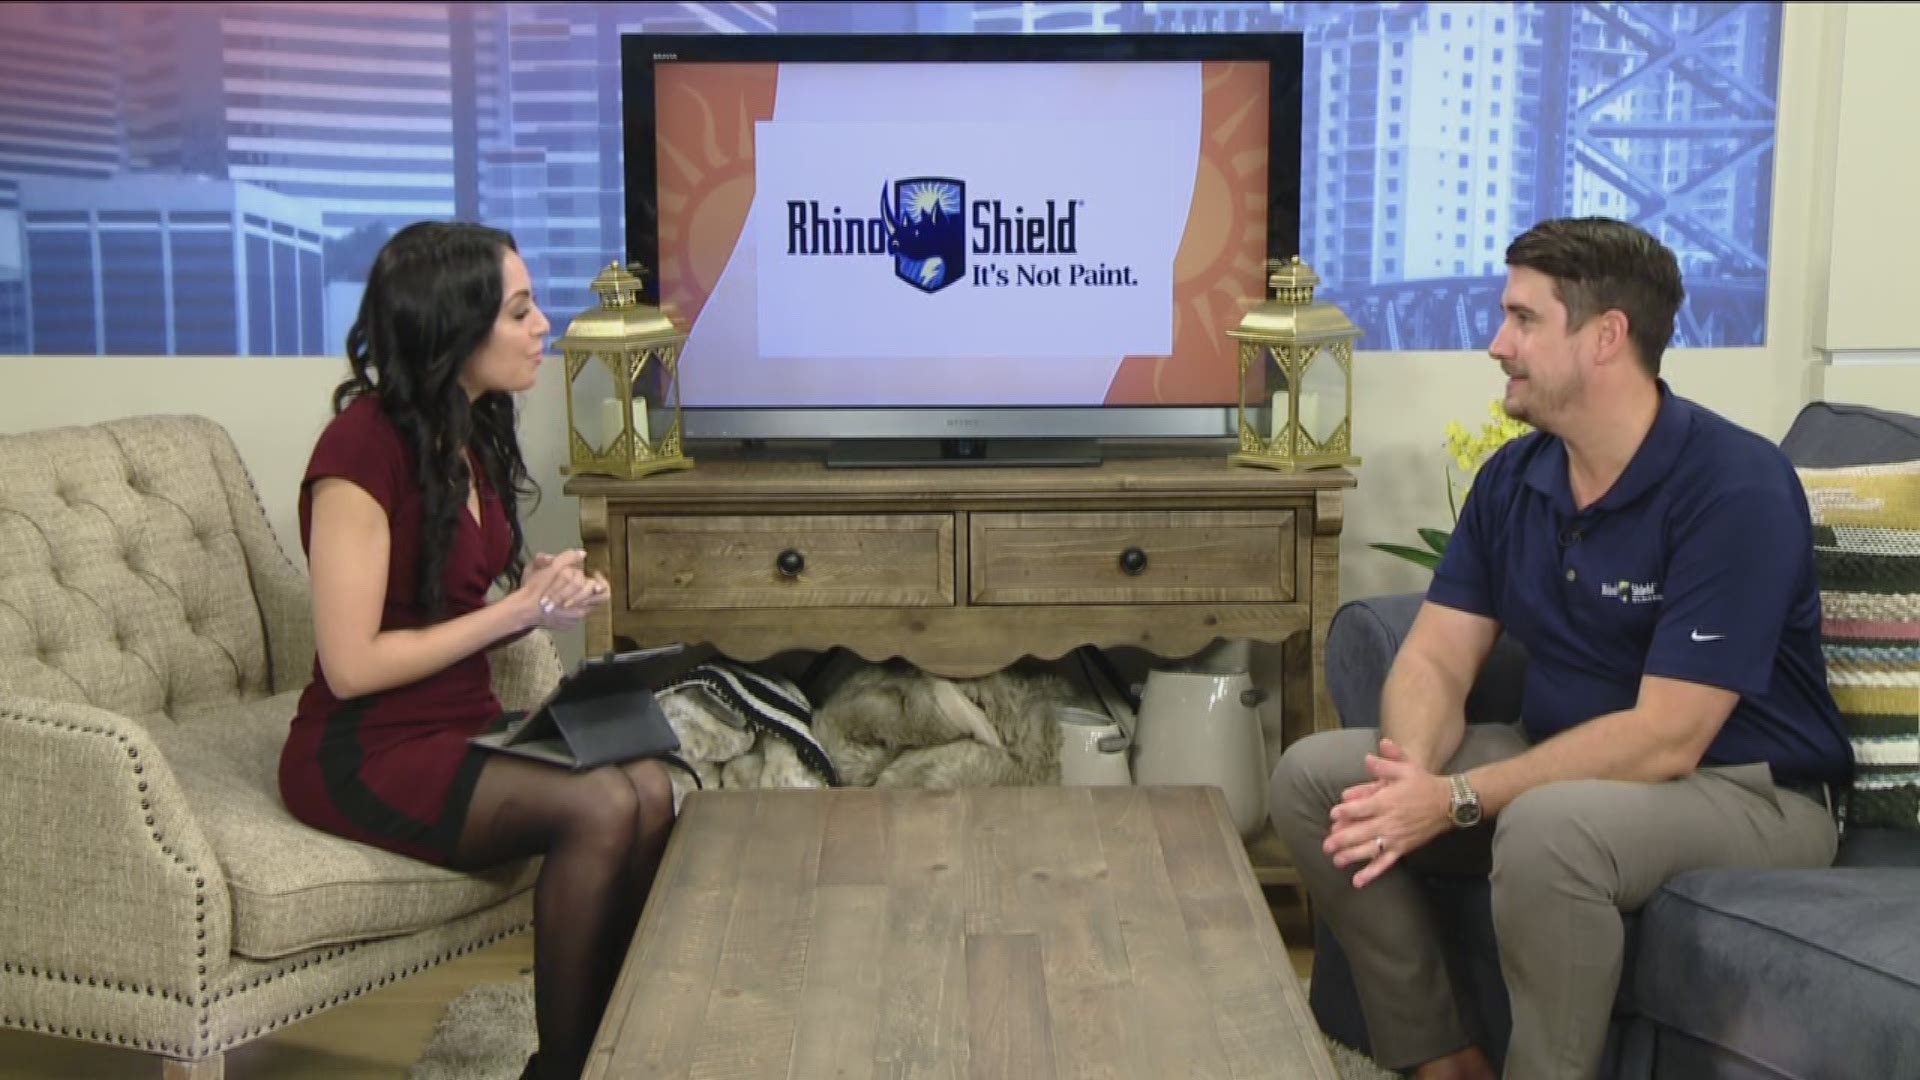 Jay Mariano of Rhino Shield discusses how choosing the right color to paint your home could save you money.